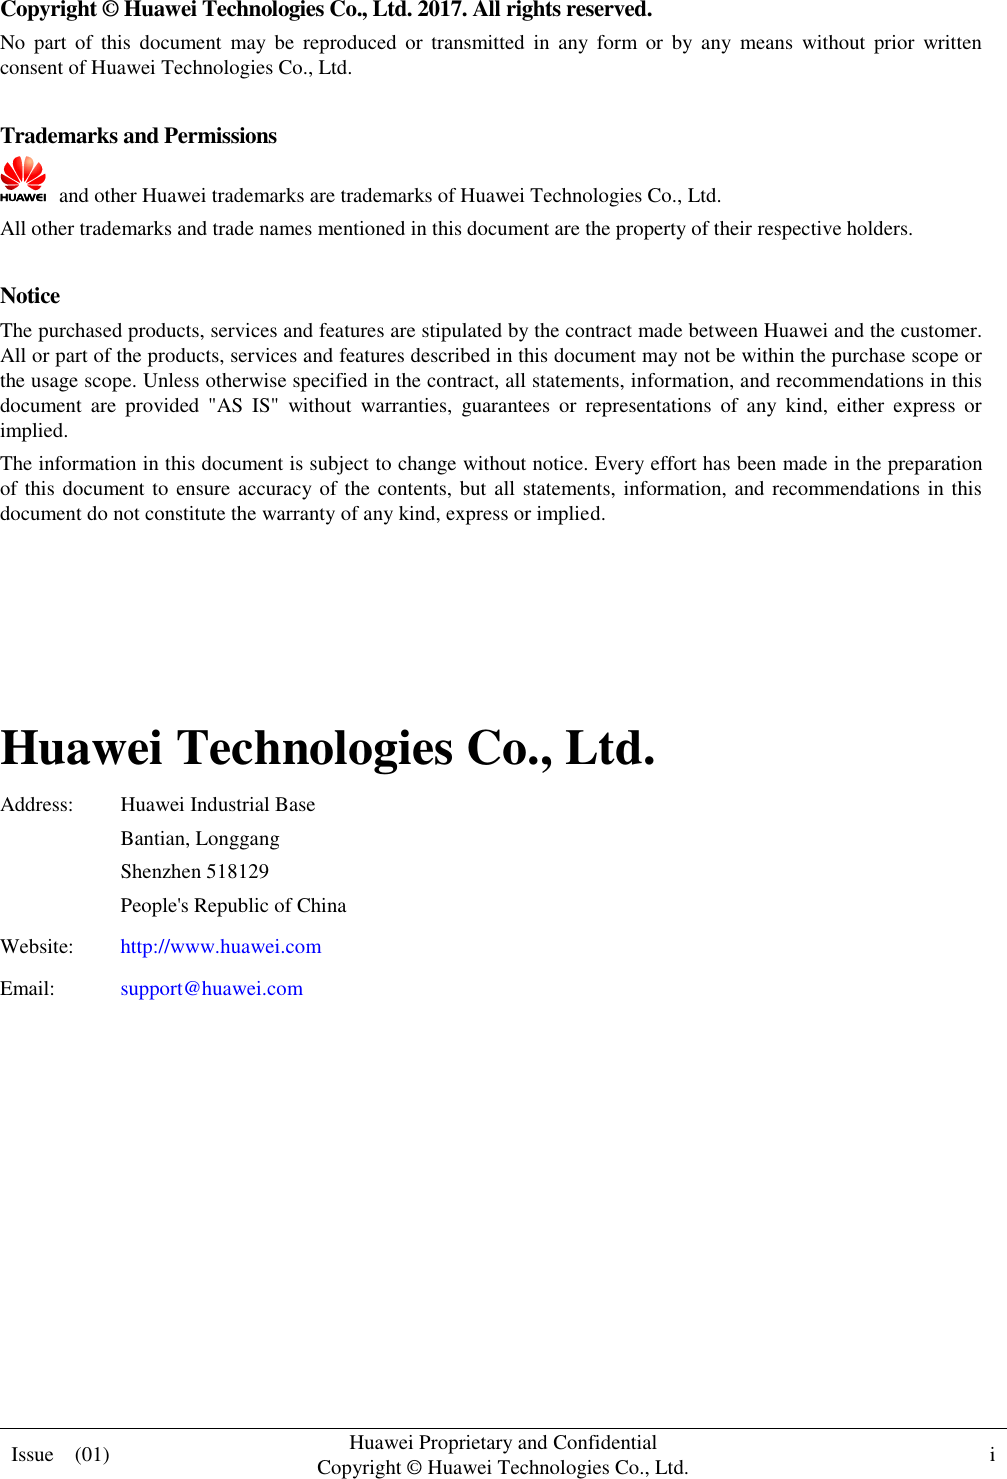  Issue    (01) Huawei Proprietary and Confidential                                     Copyright © Huawei Technologies Co., Ltd. i    Copyright © Huawei Technologies Co., Ltd. 2017. All rights reserved. No  part  of  this  document  may  be  reproduced  or  transmitted  in  any  form  or  by  any  means  without  prior  written consent of Huawei Technologies Co., Ltd.  Trademarks and Permissions   and other Huawei trademarks are trademarks of Huawei Technologies Co., Ltd. All other trademarks and trade names mentioned in this document are the property of their respective holders.  Notice The purchased products, services and features are stipulated by the contract made between Huawei and the customer. All or part of the products, services and features described in this document may not be within the purchase scope or the usage scope. Unless otherwise specified in the contract, all statements, information, and recommendations in this document  are  provided  &quot;AS  IS&quot;  without  warranties,  guarantees  or  representations  of  any  kind,  either  express  or implied. The information in this document is subject to change without notice. Every effort has been made in the preparation of this document to ensure accuracy of the contents, but all statements, information, and recommendations in this document do not constitute the warranty of any kind, express or implied.     Huawei Technologies Co., Ltd. Address: Huawei Industrial Base Bantian, Longgang Shenzhen 518129 People&apos;s Republic of China Website: http://www.huawei.com Email: support@huawei.com          